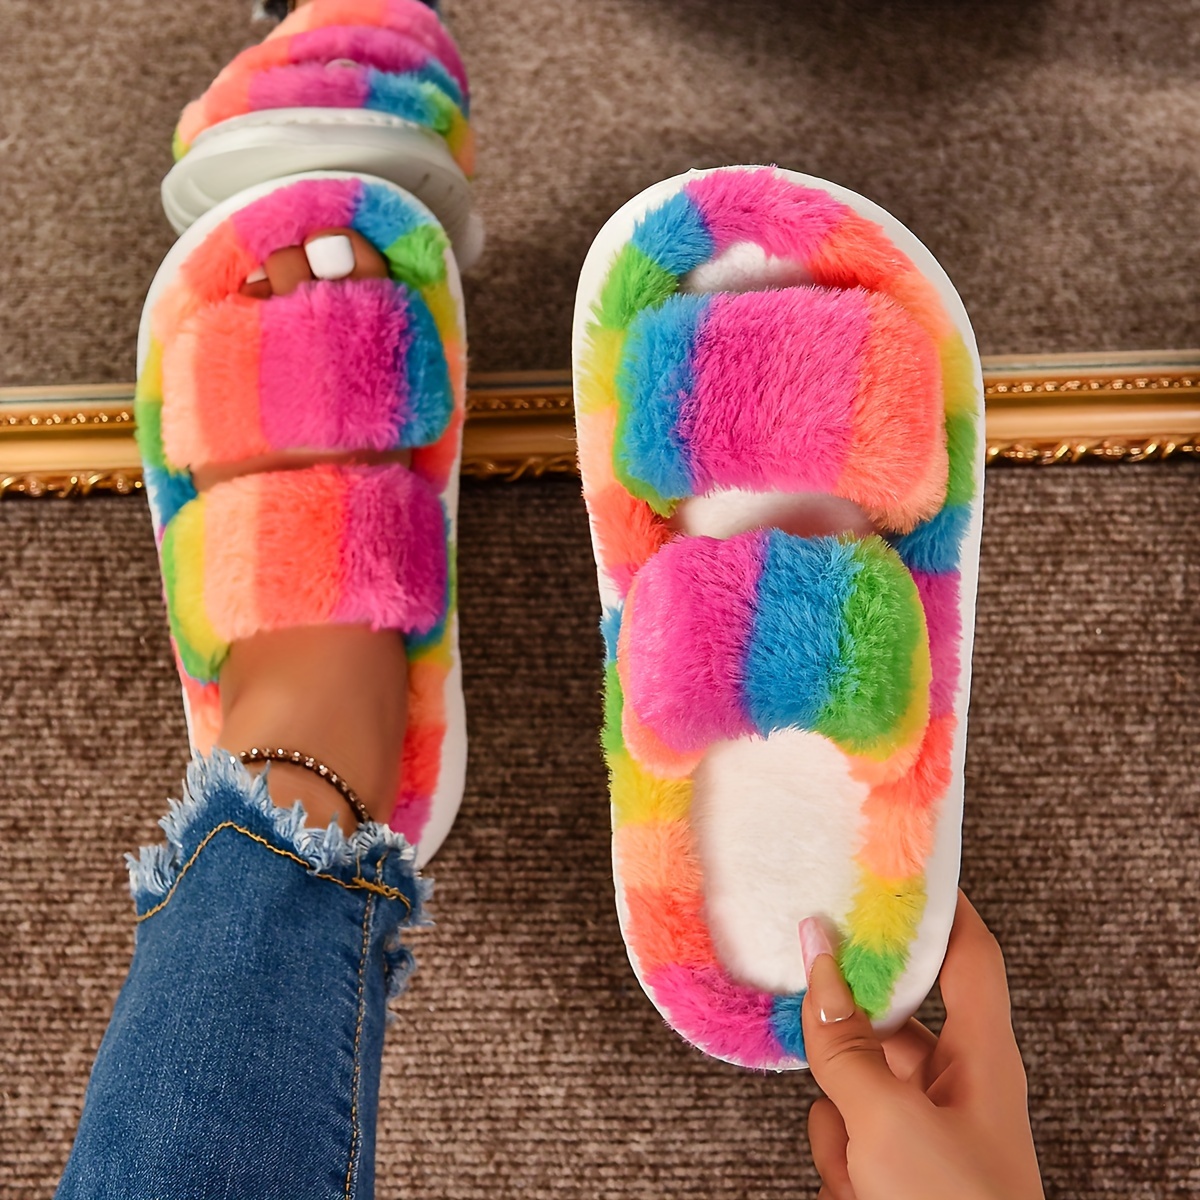 

Chic Women's Plush Slippers - Colorful, Non-slip Eva Sole, Cozy Indoor Shoes For Comfort & Style Shoes For Women Sandals For Women